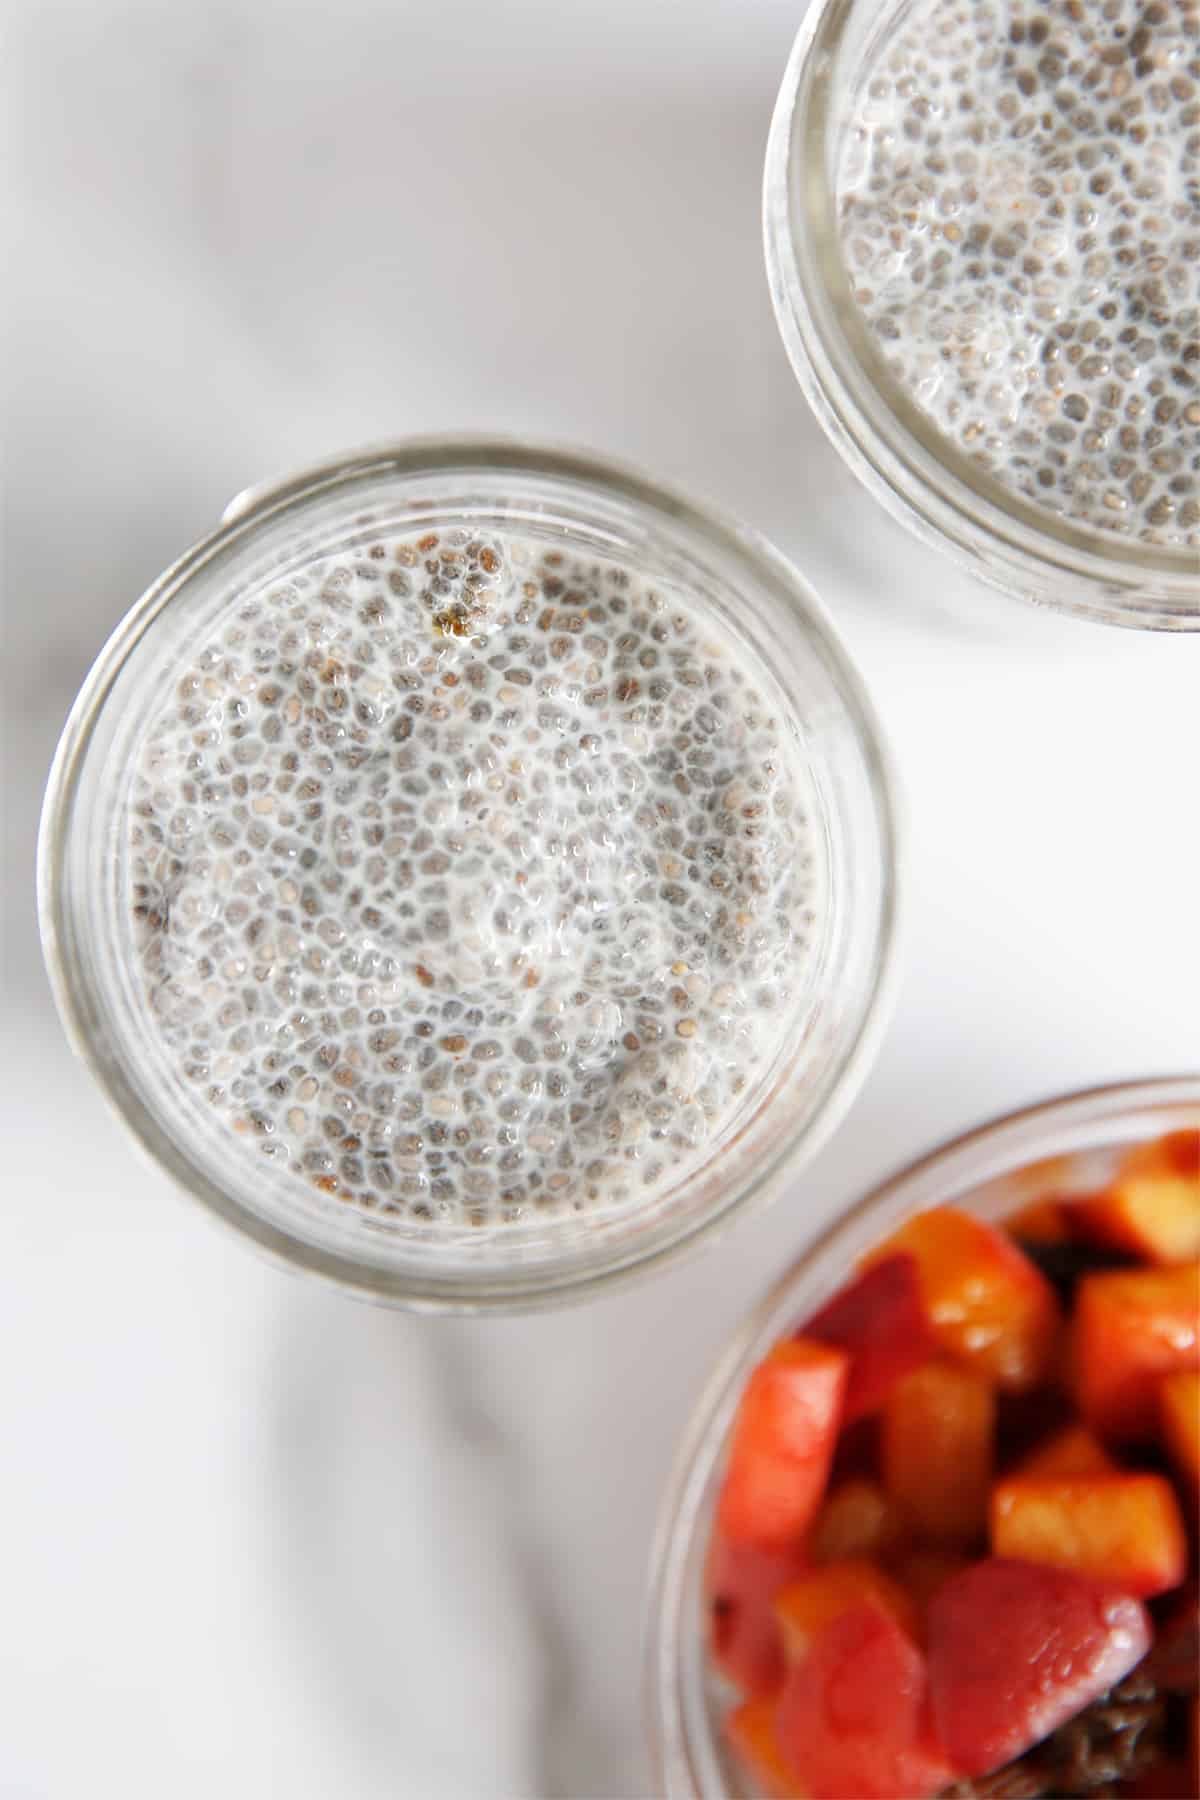 Apple Chia Seed Pudding Recipe - Lexi's Clean Kitchen